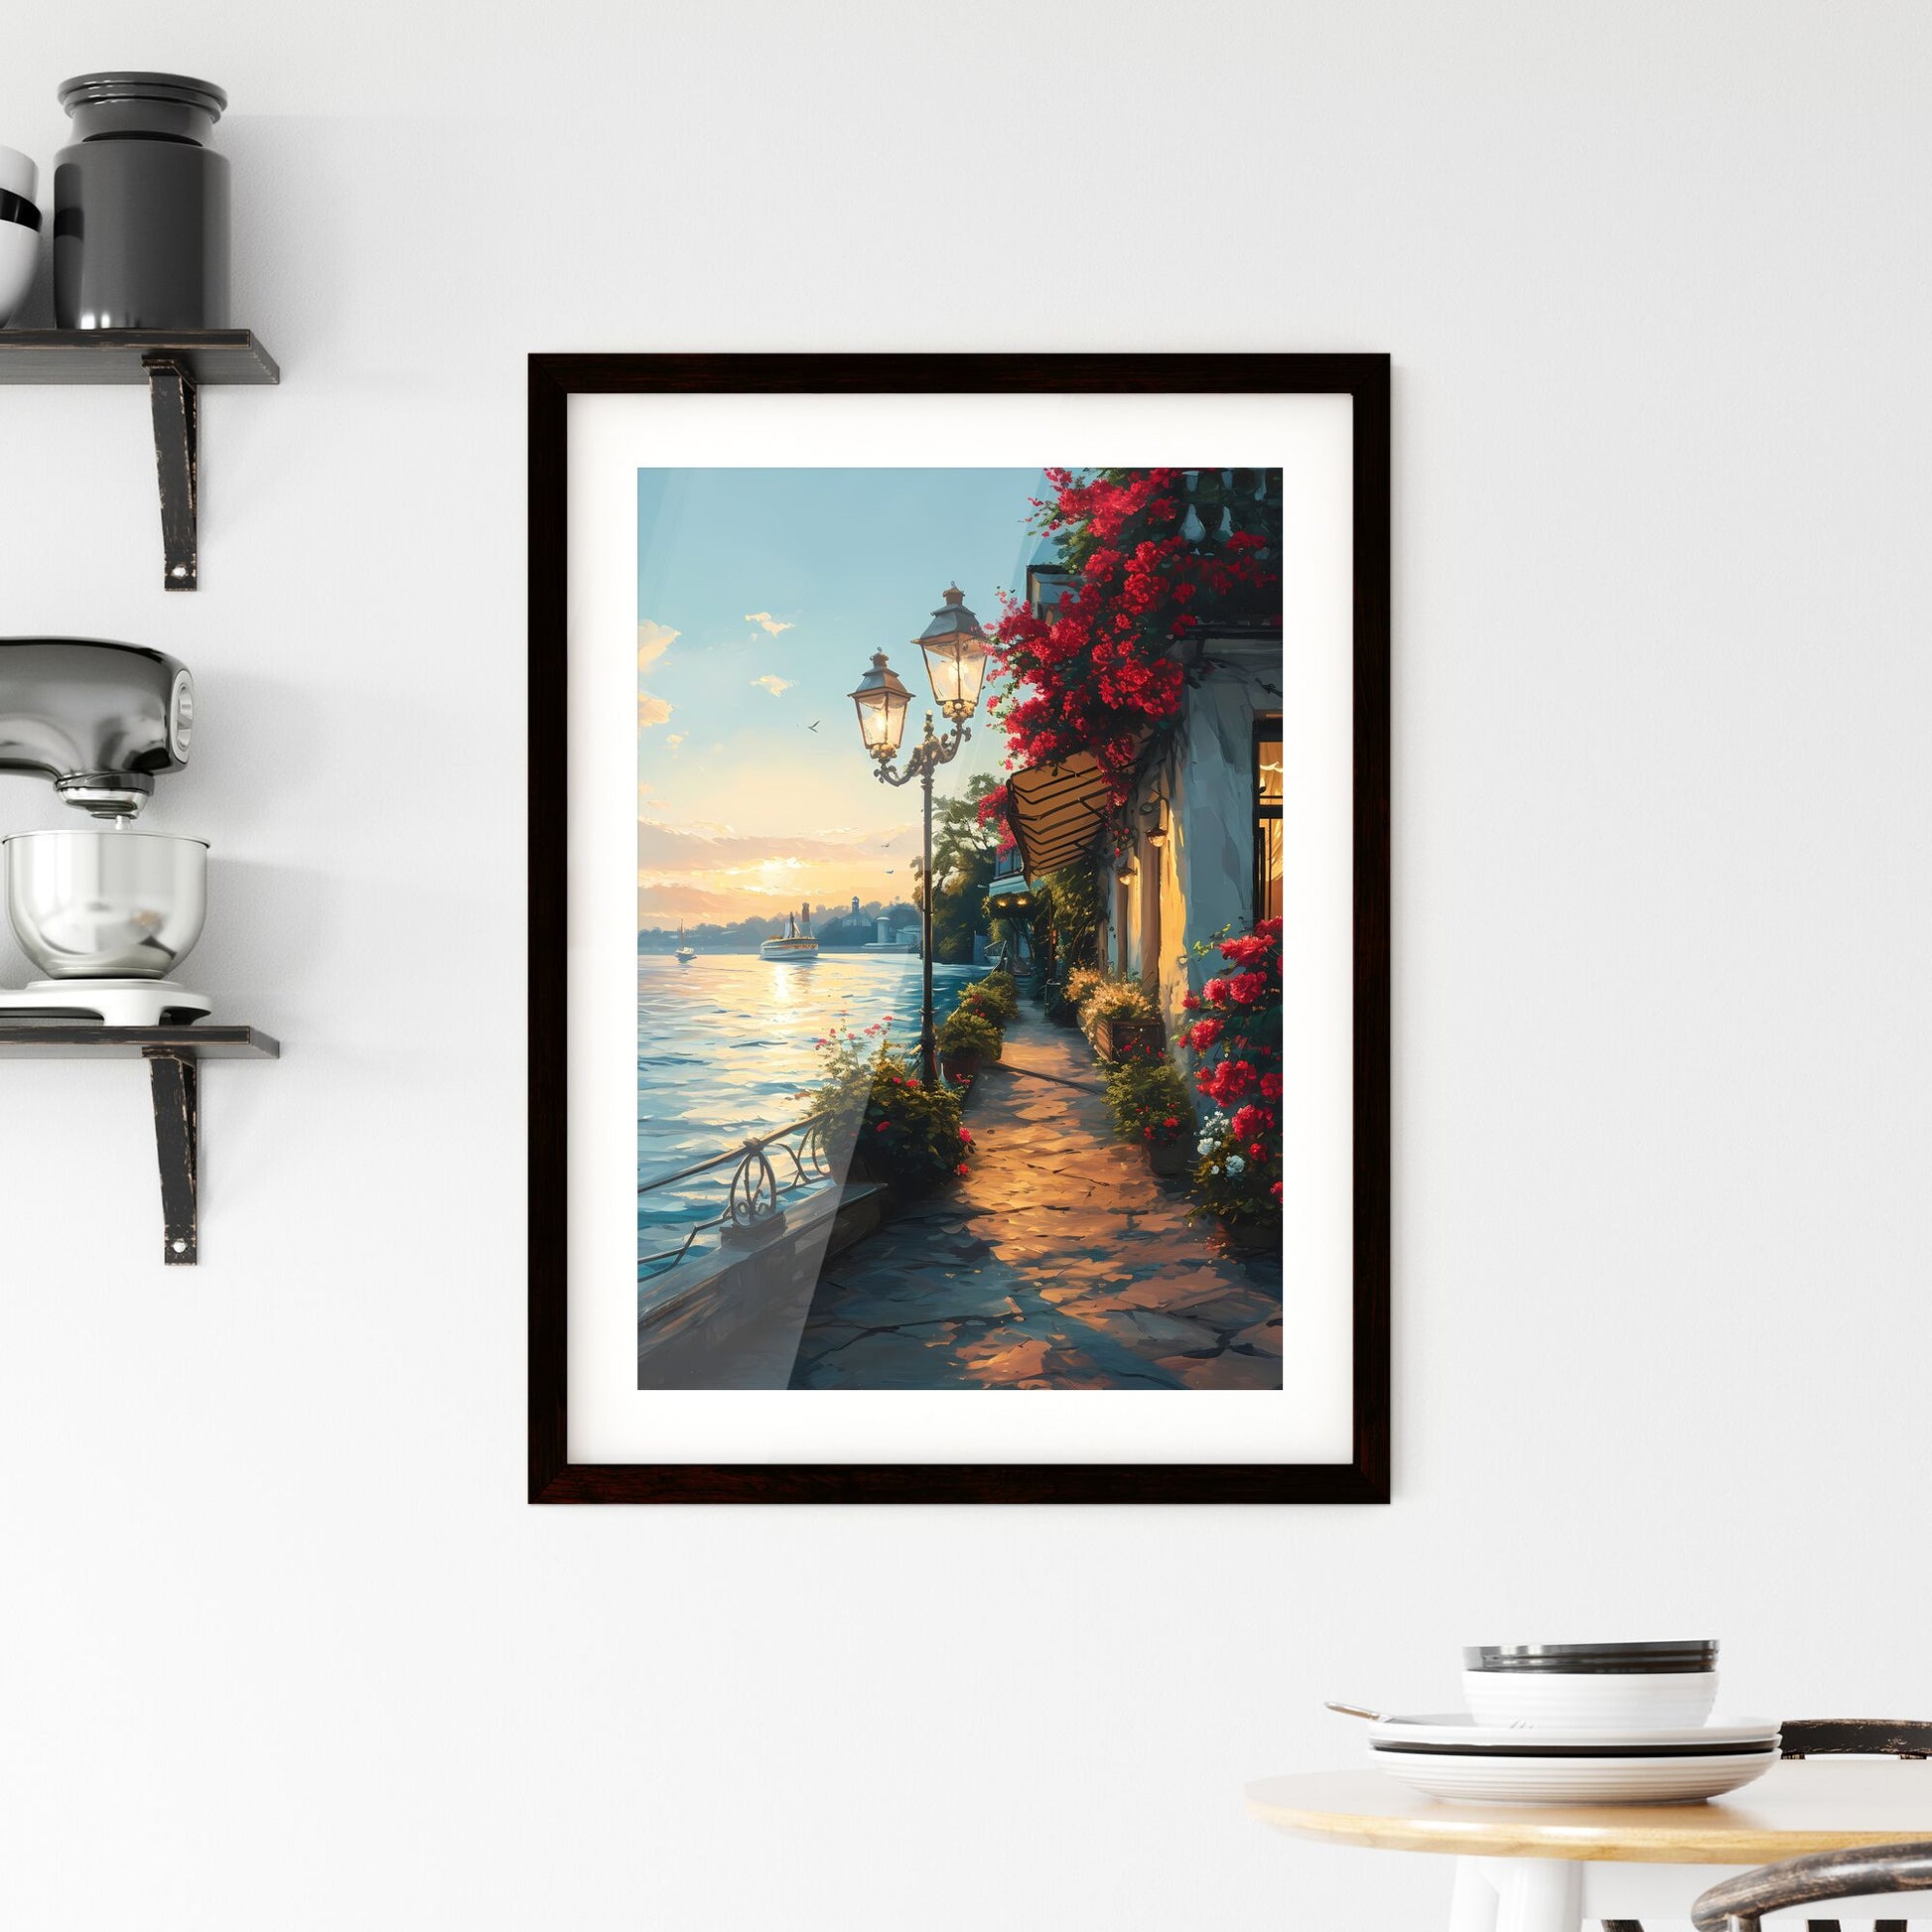 A Poster of Cafe warm lamp lakeside - A Street With Flowers And A Body Of Water Default Title